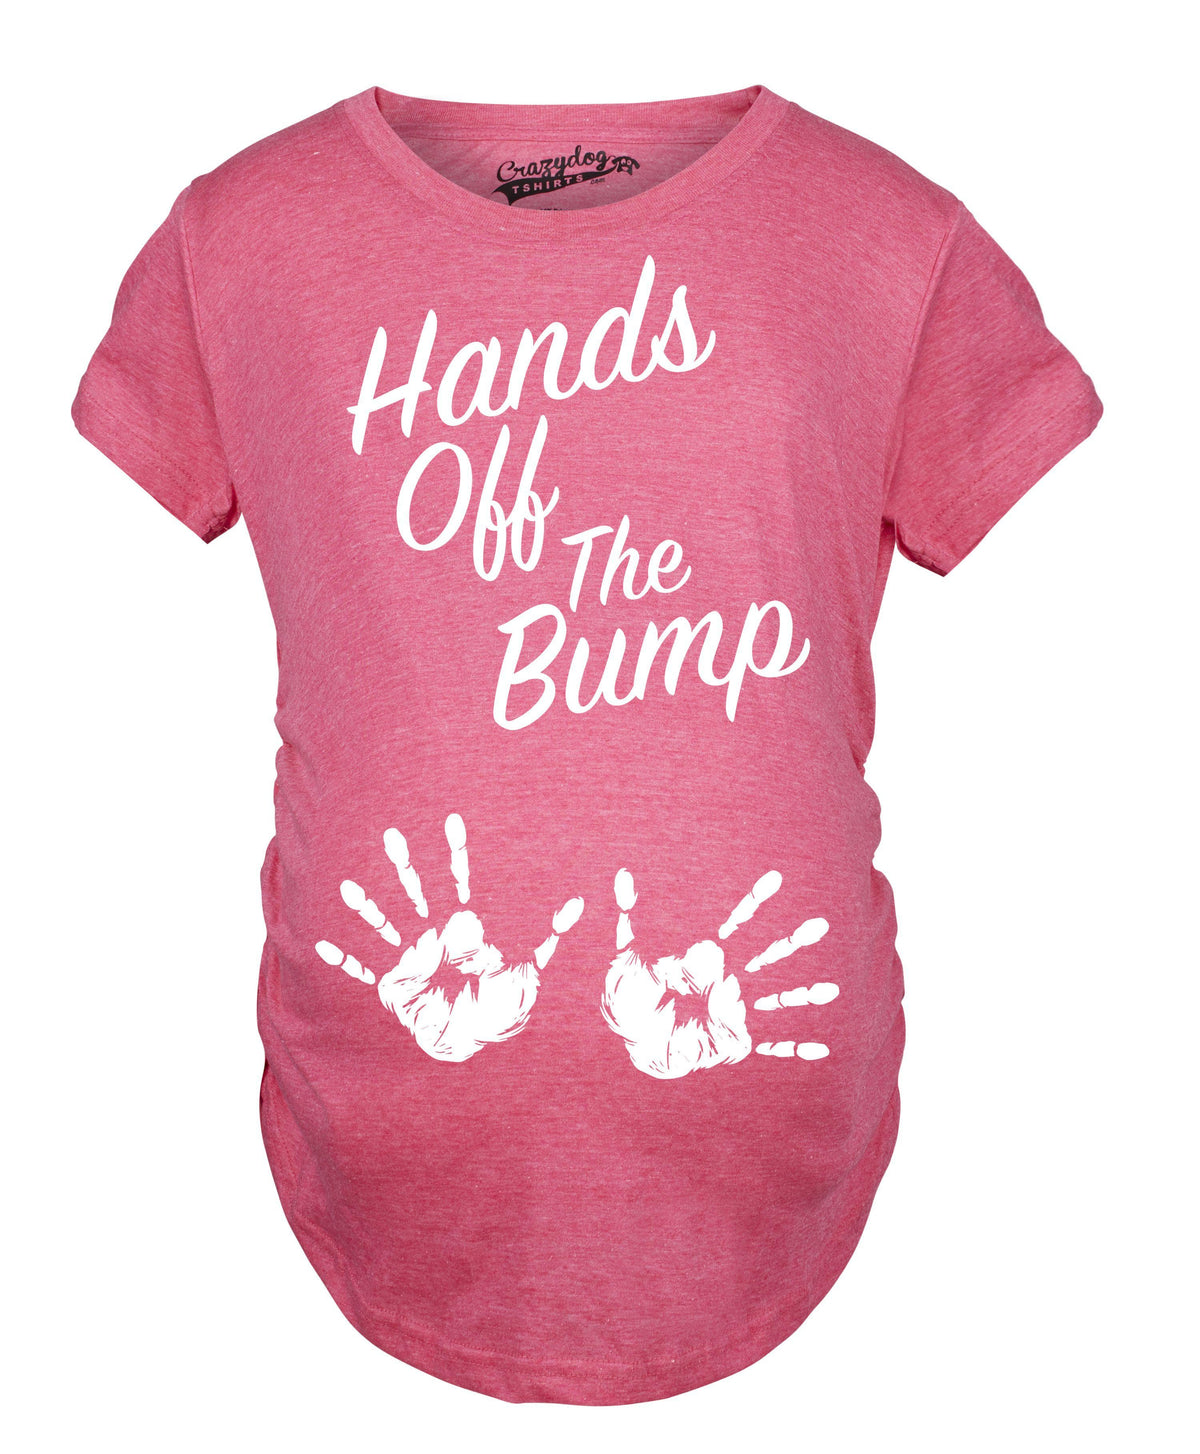 Hands Off The Bump Maternity Tshirt - Crazy Dog T-Shirts